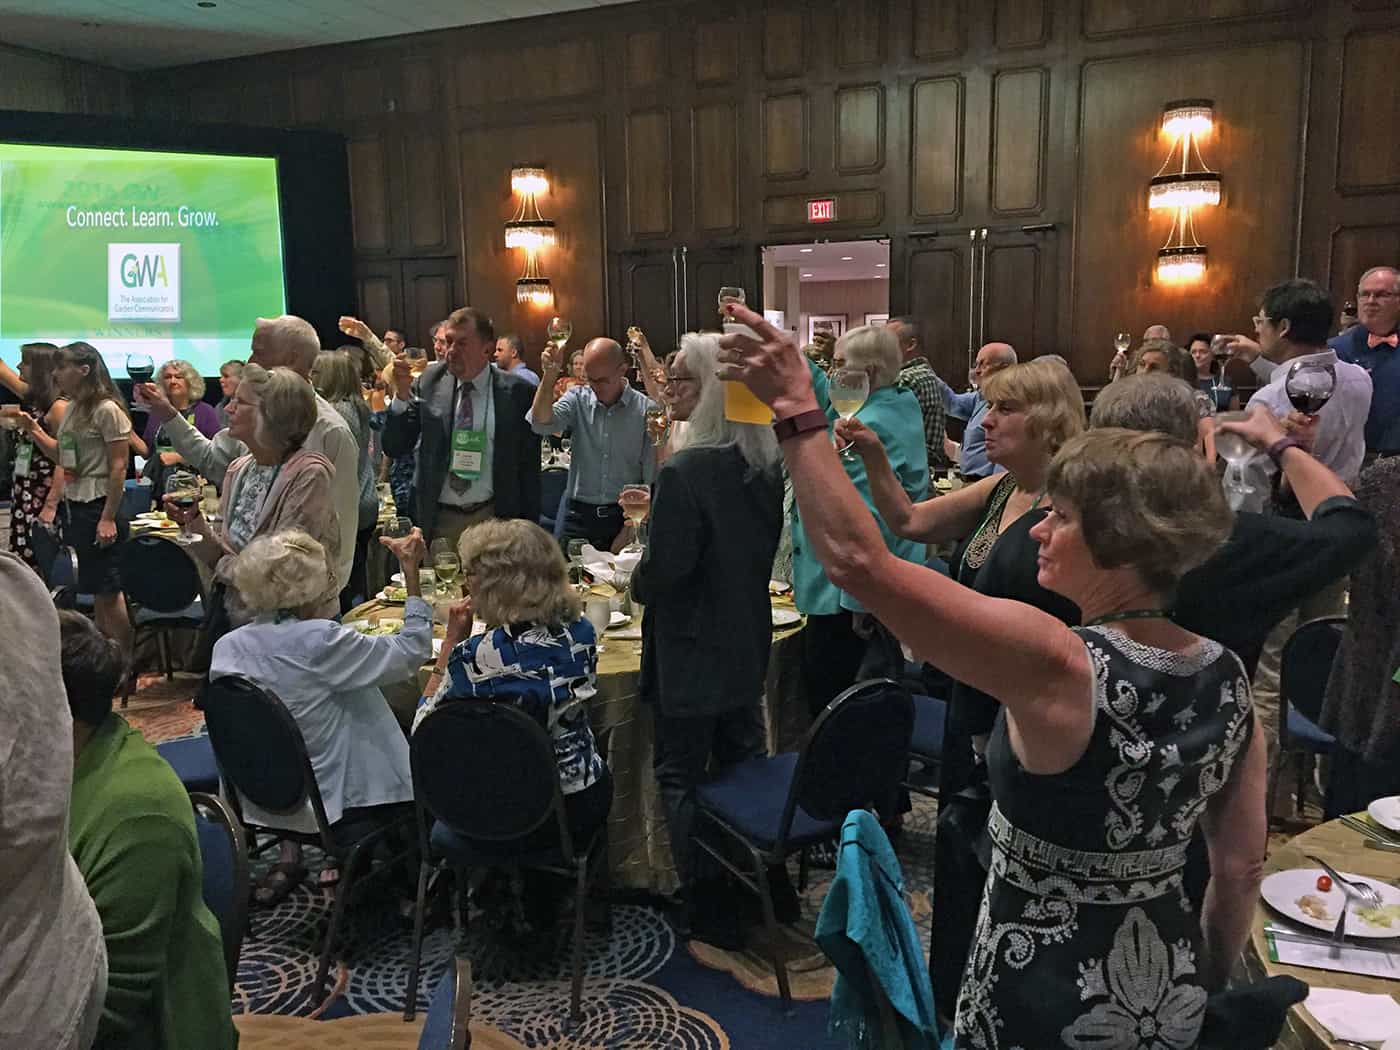 At the GWA meeting we raise our glass to fellow garden communicators, those who supply plants and products that help create beautiful gardens, and to everyone who appreciates horticulture.